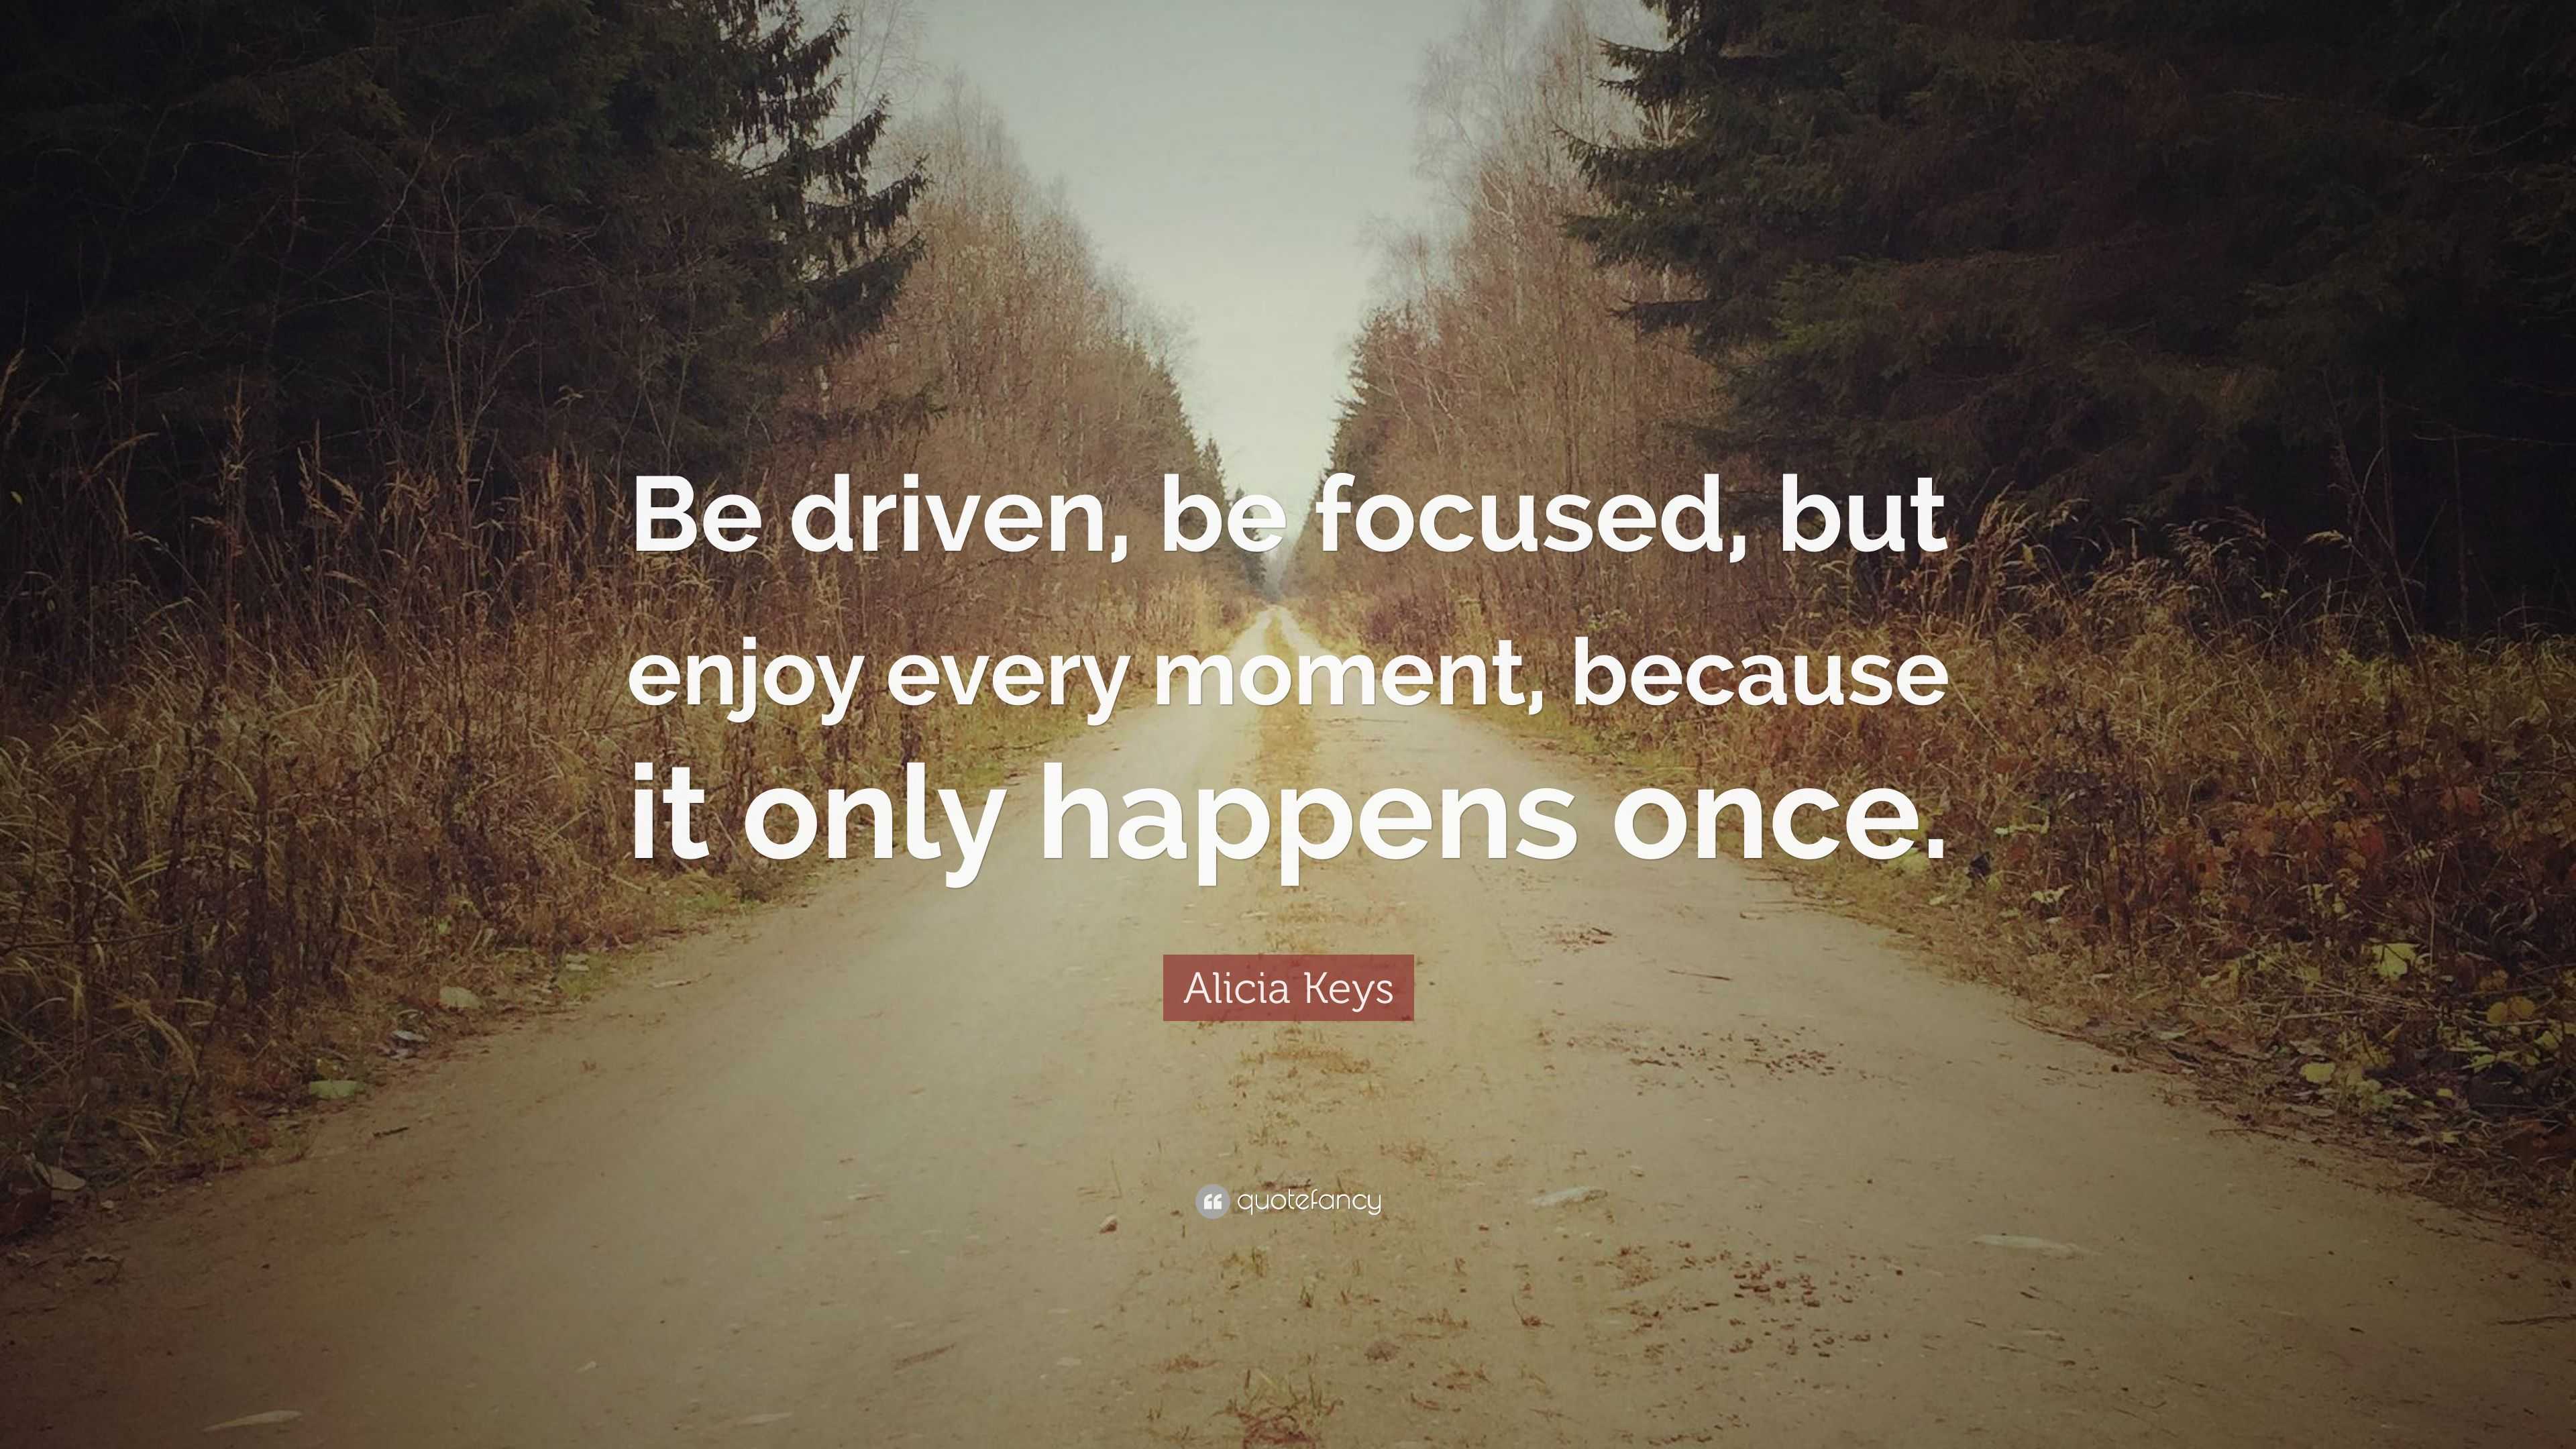 Alicia Keys Quote: “Be driven, be focused, but enjoy every moment